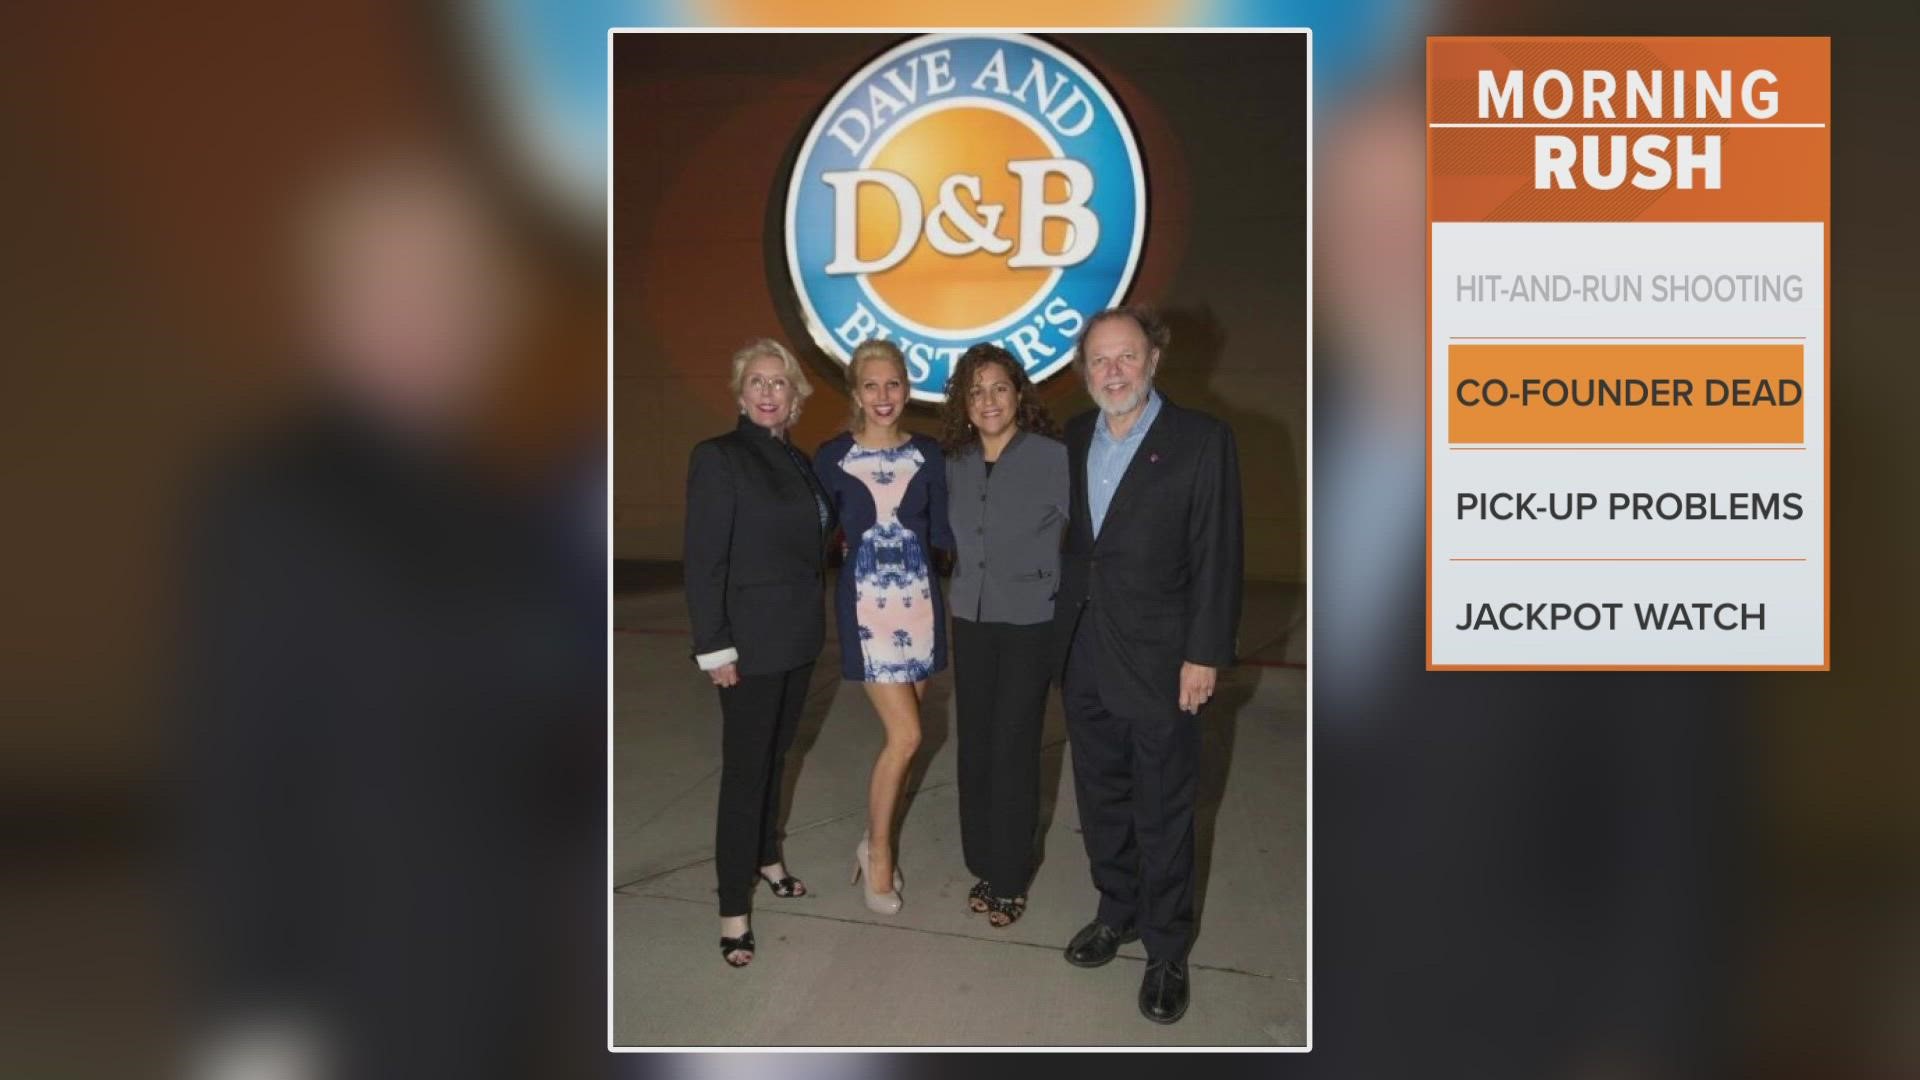 A representative with Dave & Buster's said Corley was an "innovative and creative force" in a statement provided to WFAA.